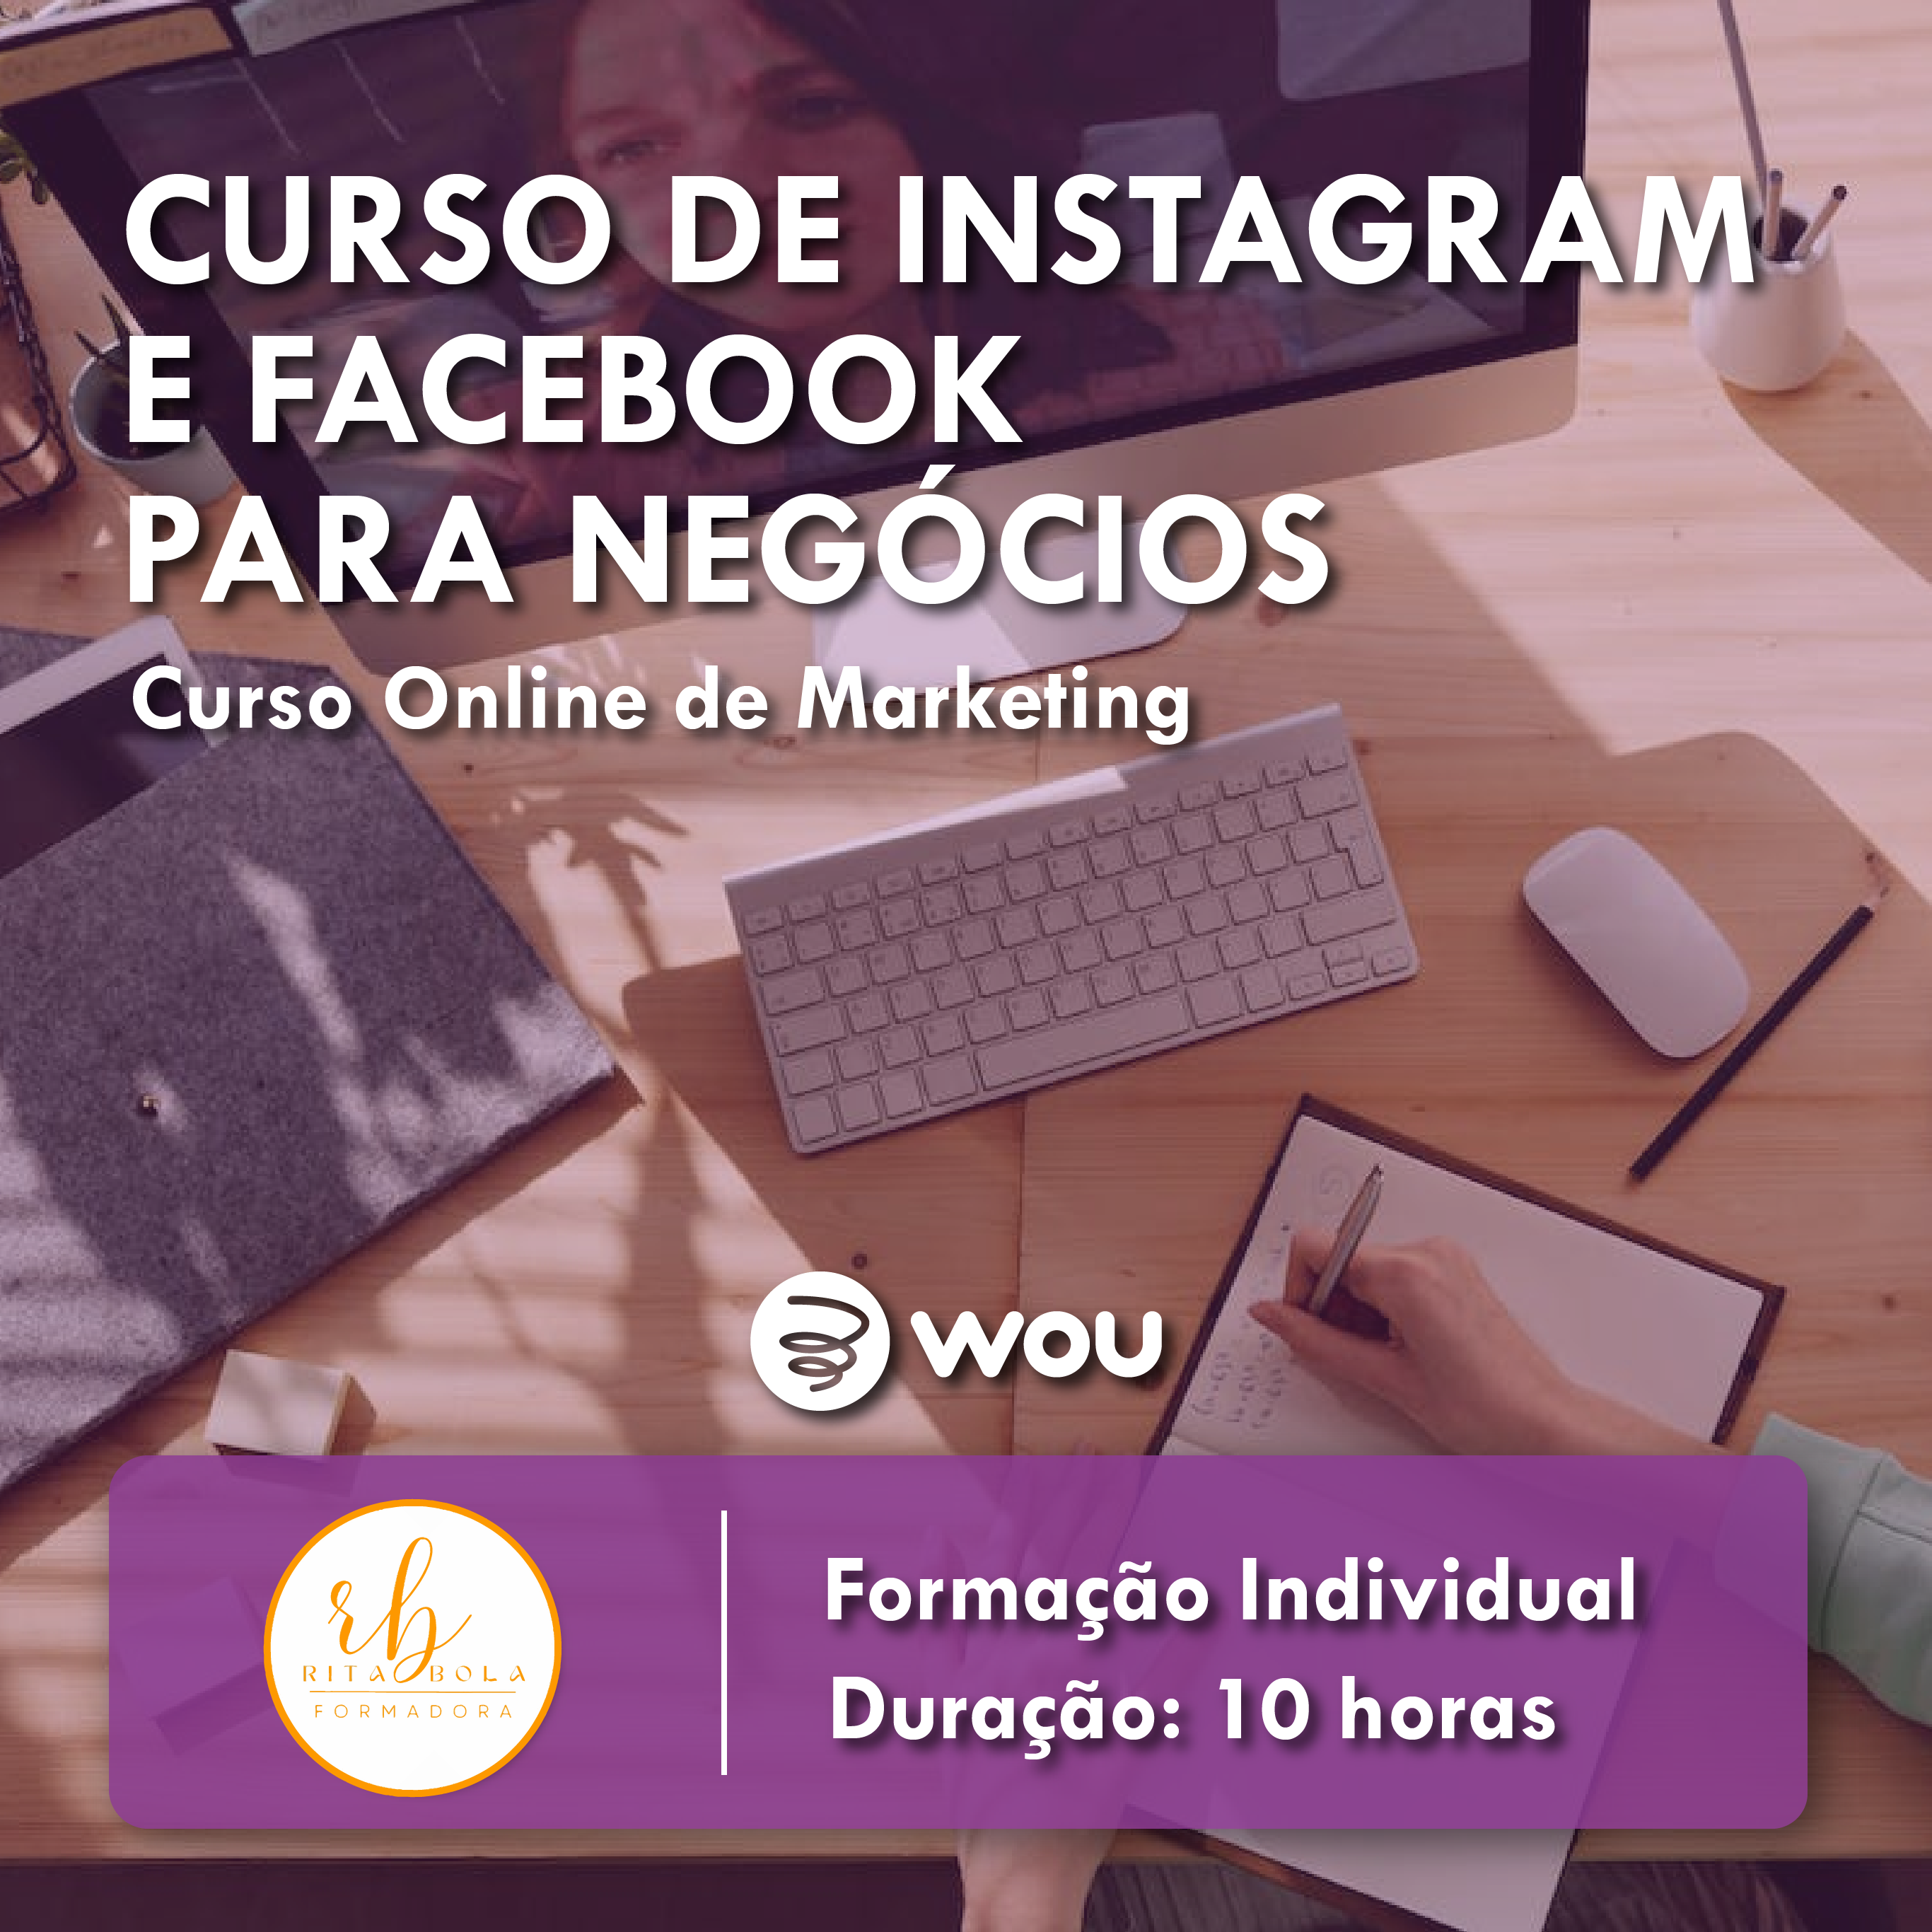 Online Facebook and Instagram Course for Businnesses